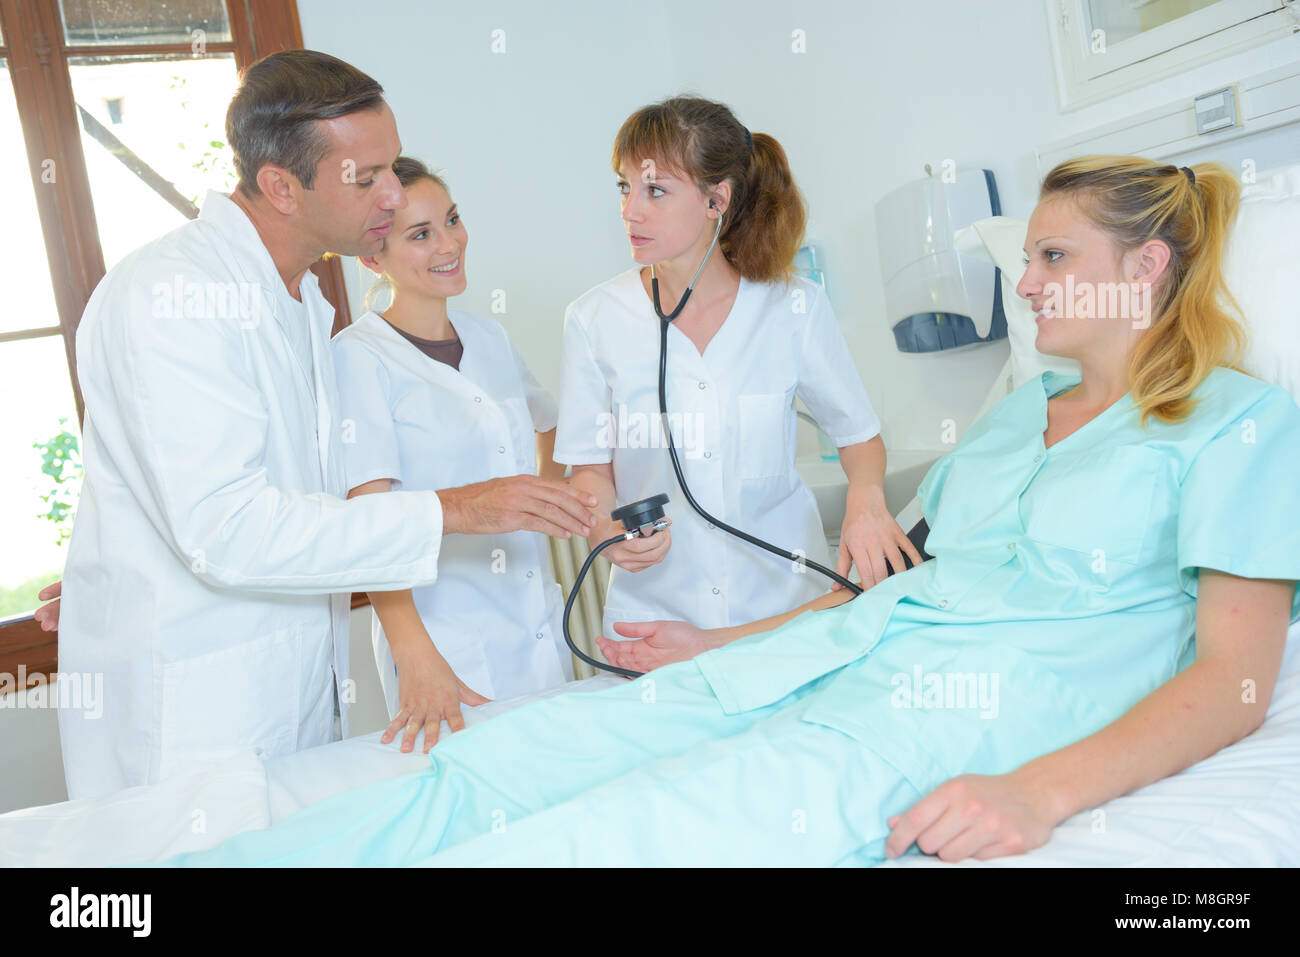 Medical staff taking patient's blood pressure Stock Photo